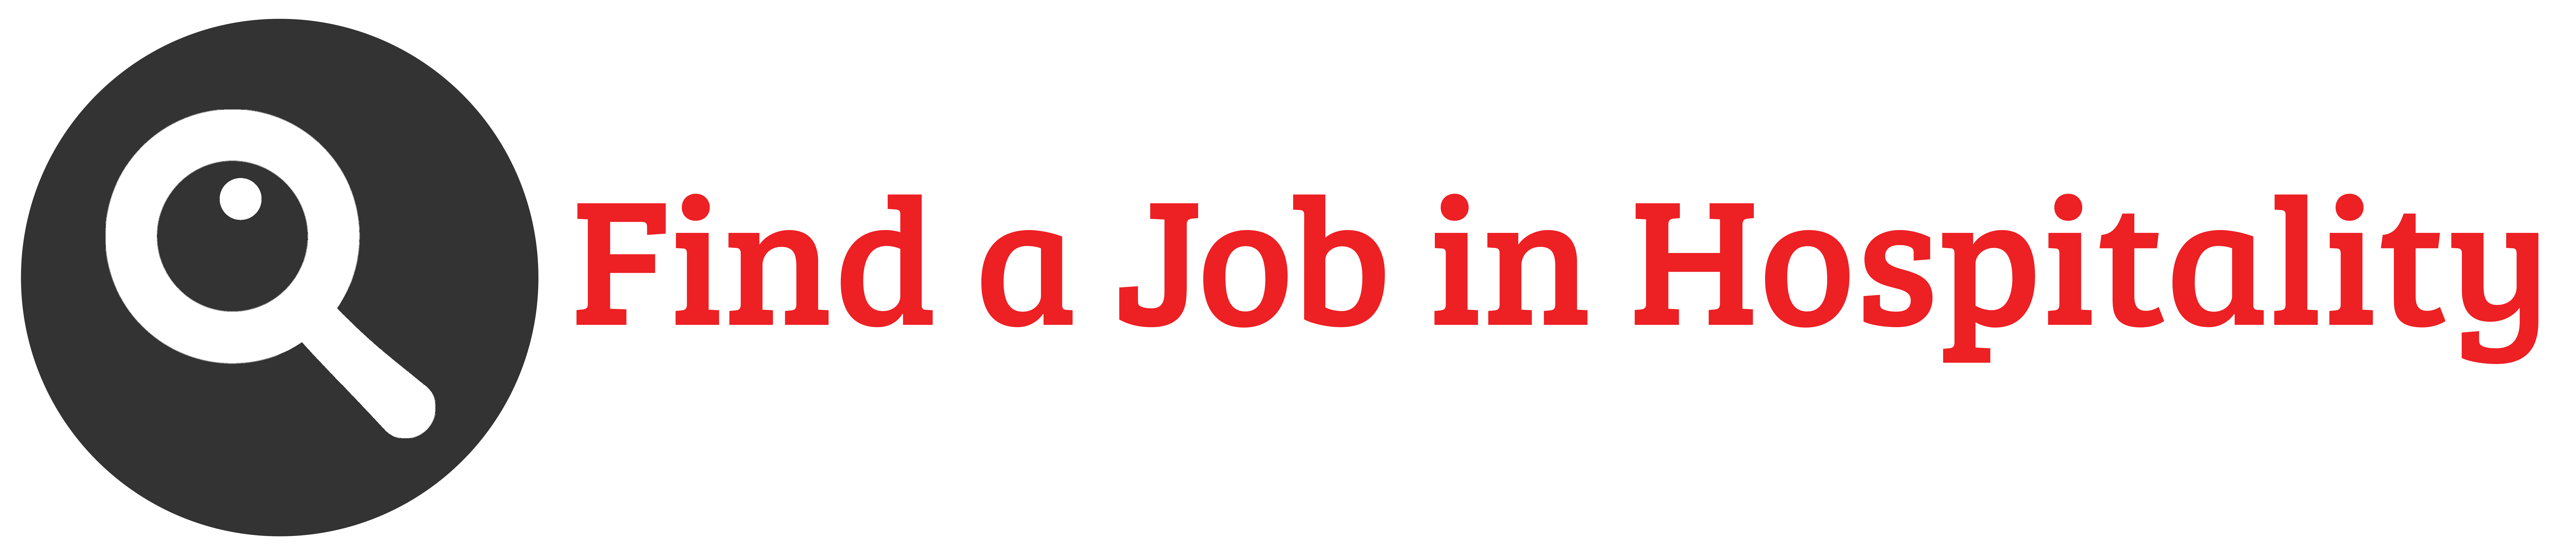 Find a Job in Hospitality